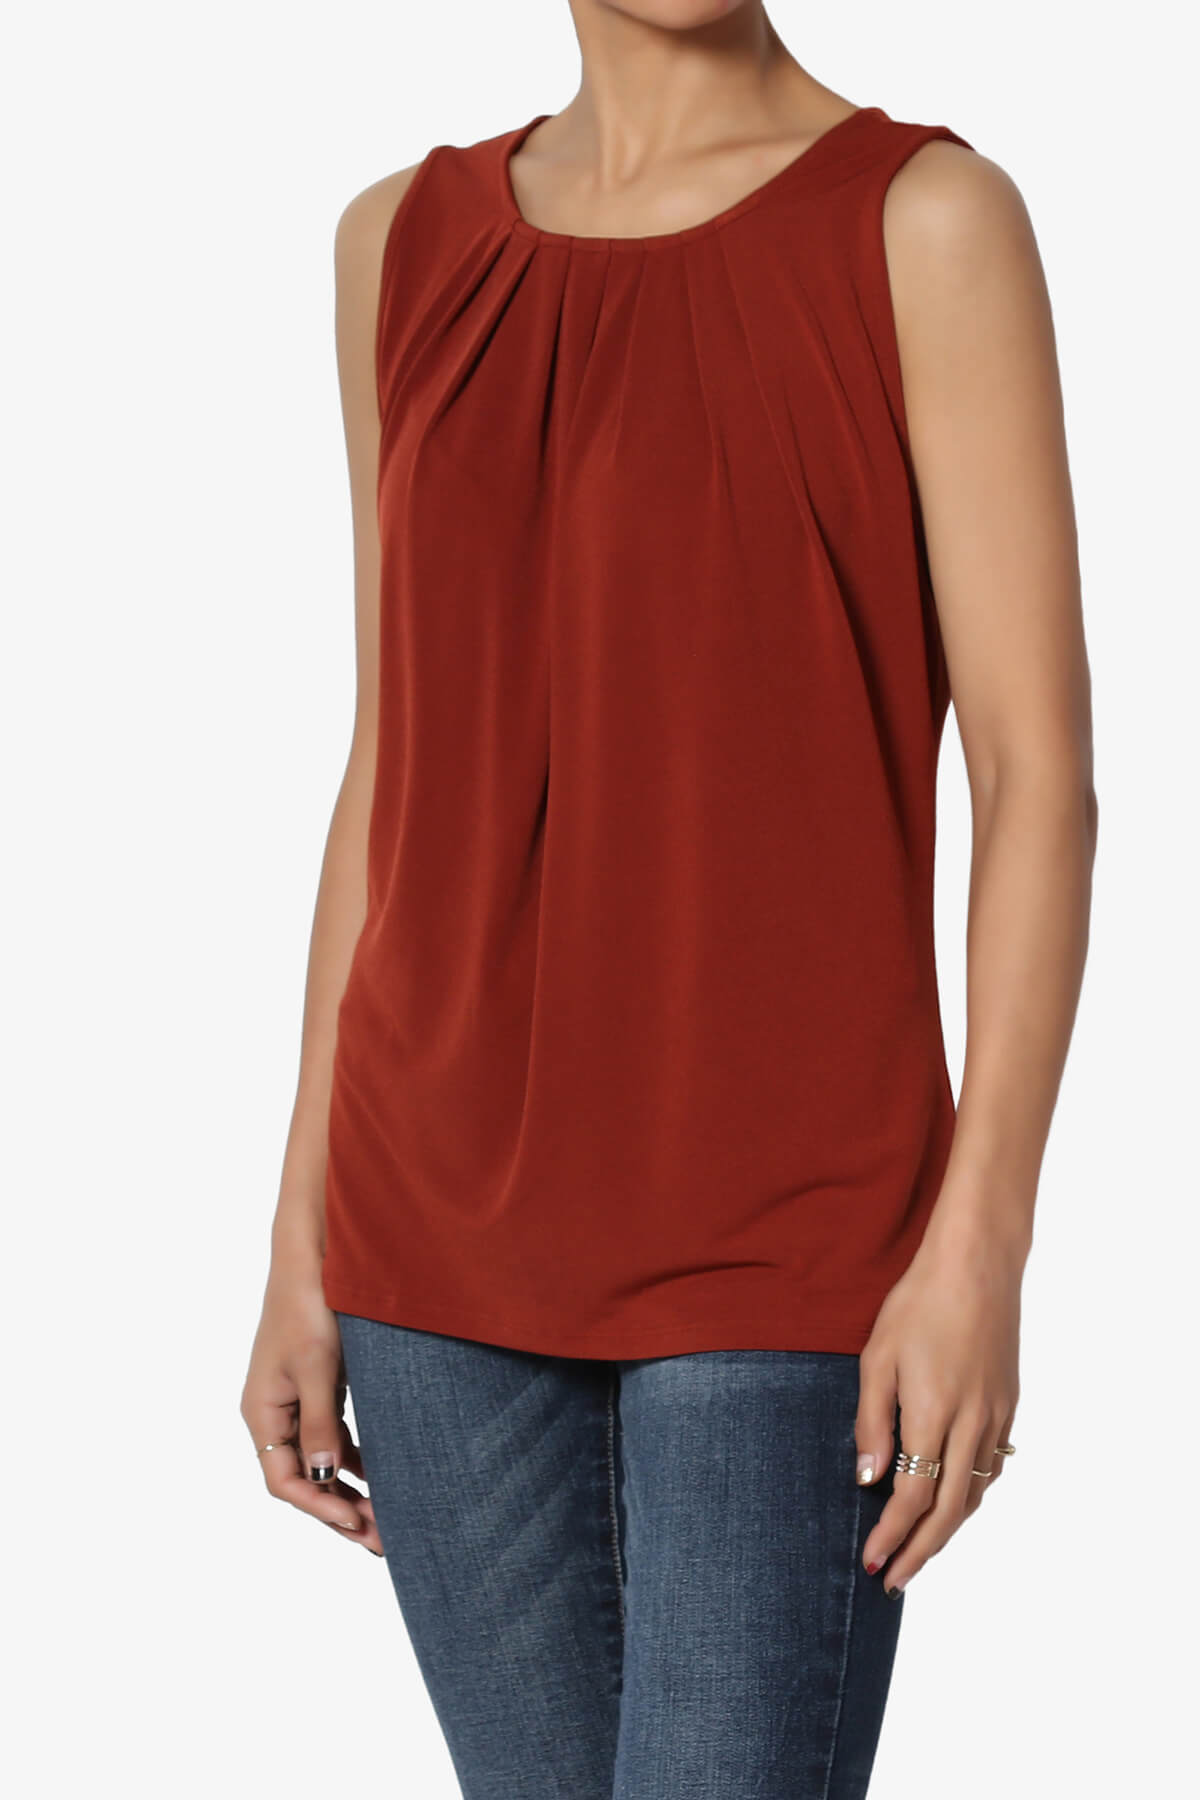 Load image into Gallery viewer, Chaffee Pleat Neck Tank Top DARK RUST_3
